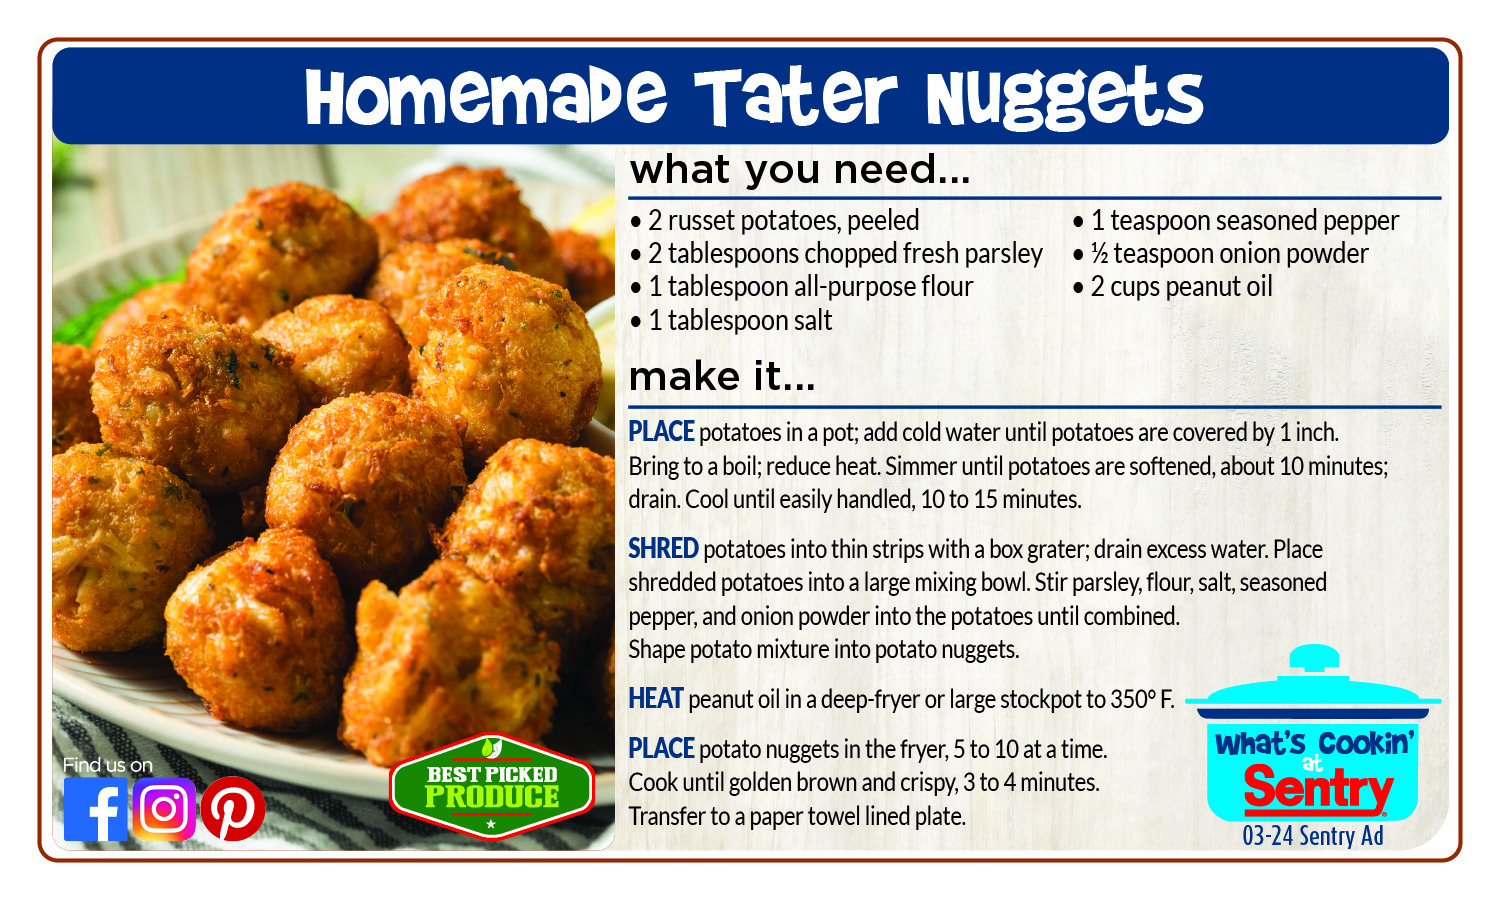 Recipe Card for Homemade Tater Nuggets